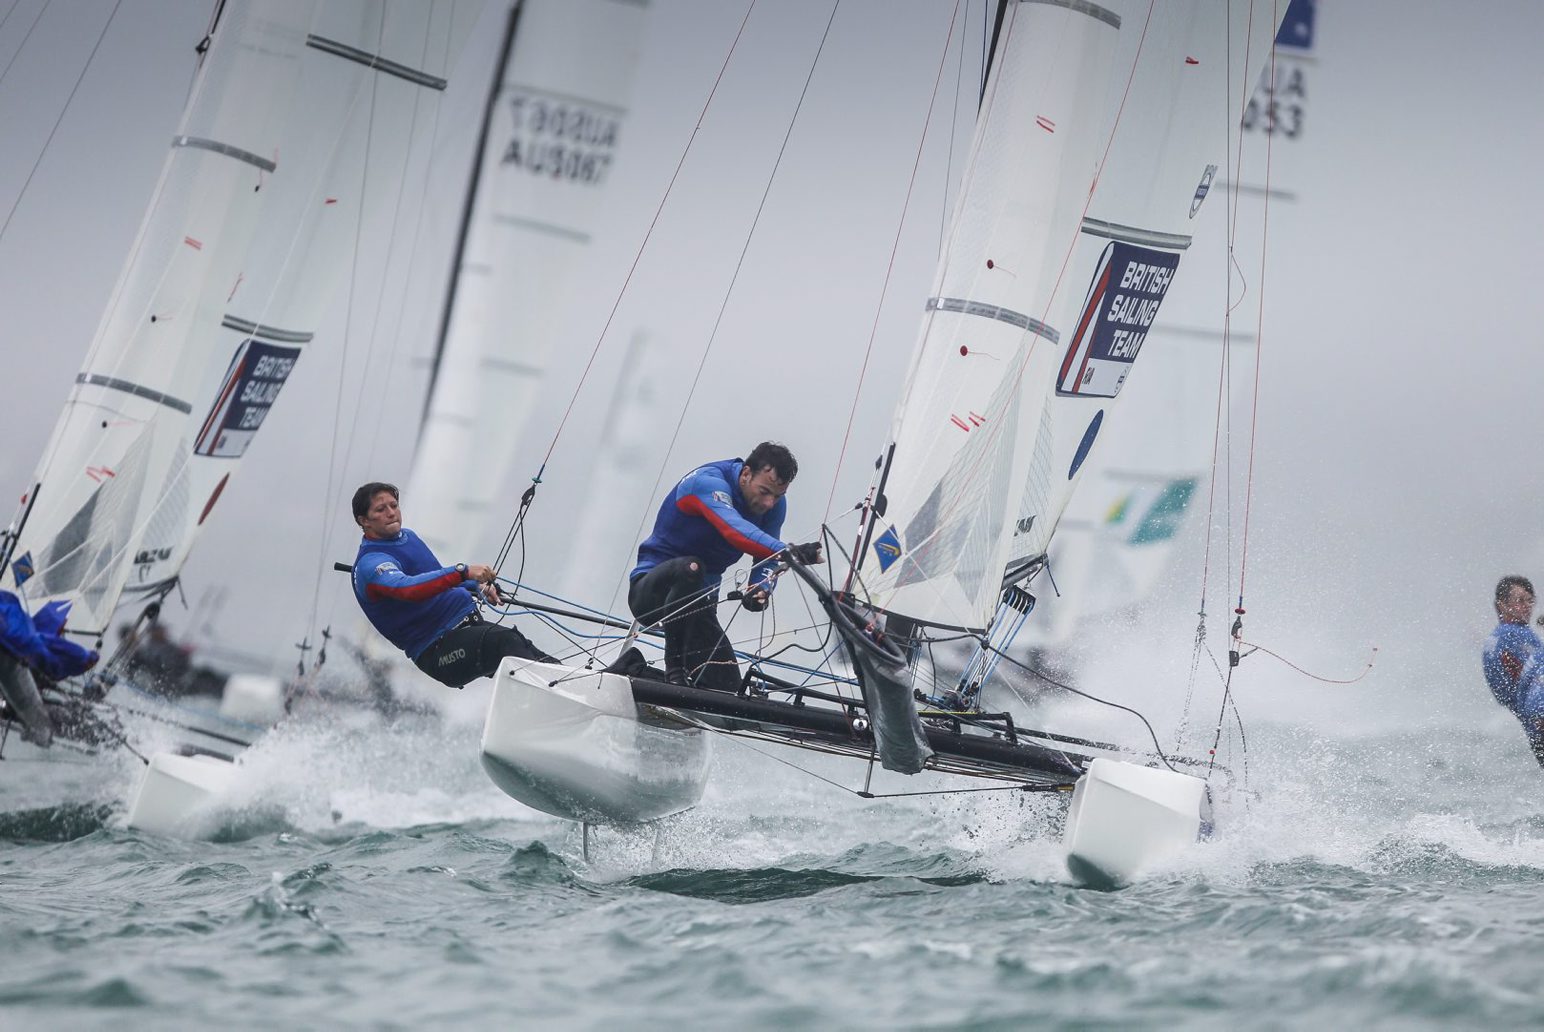 From match racing to the Nacra 17